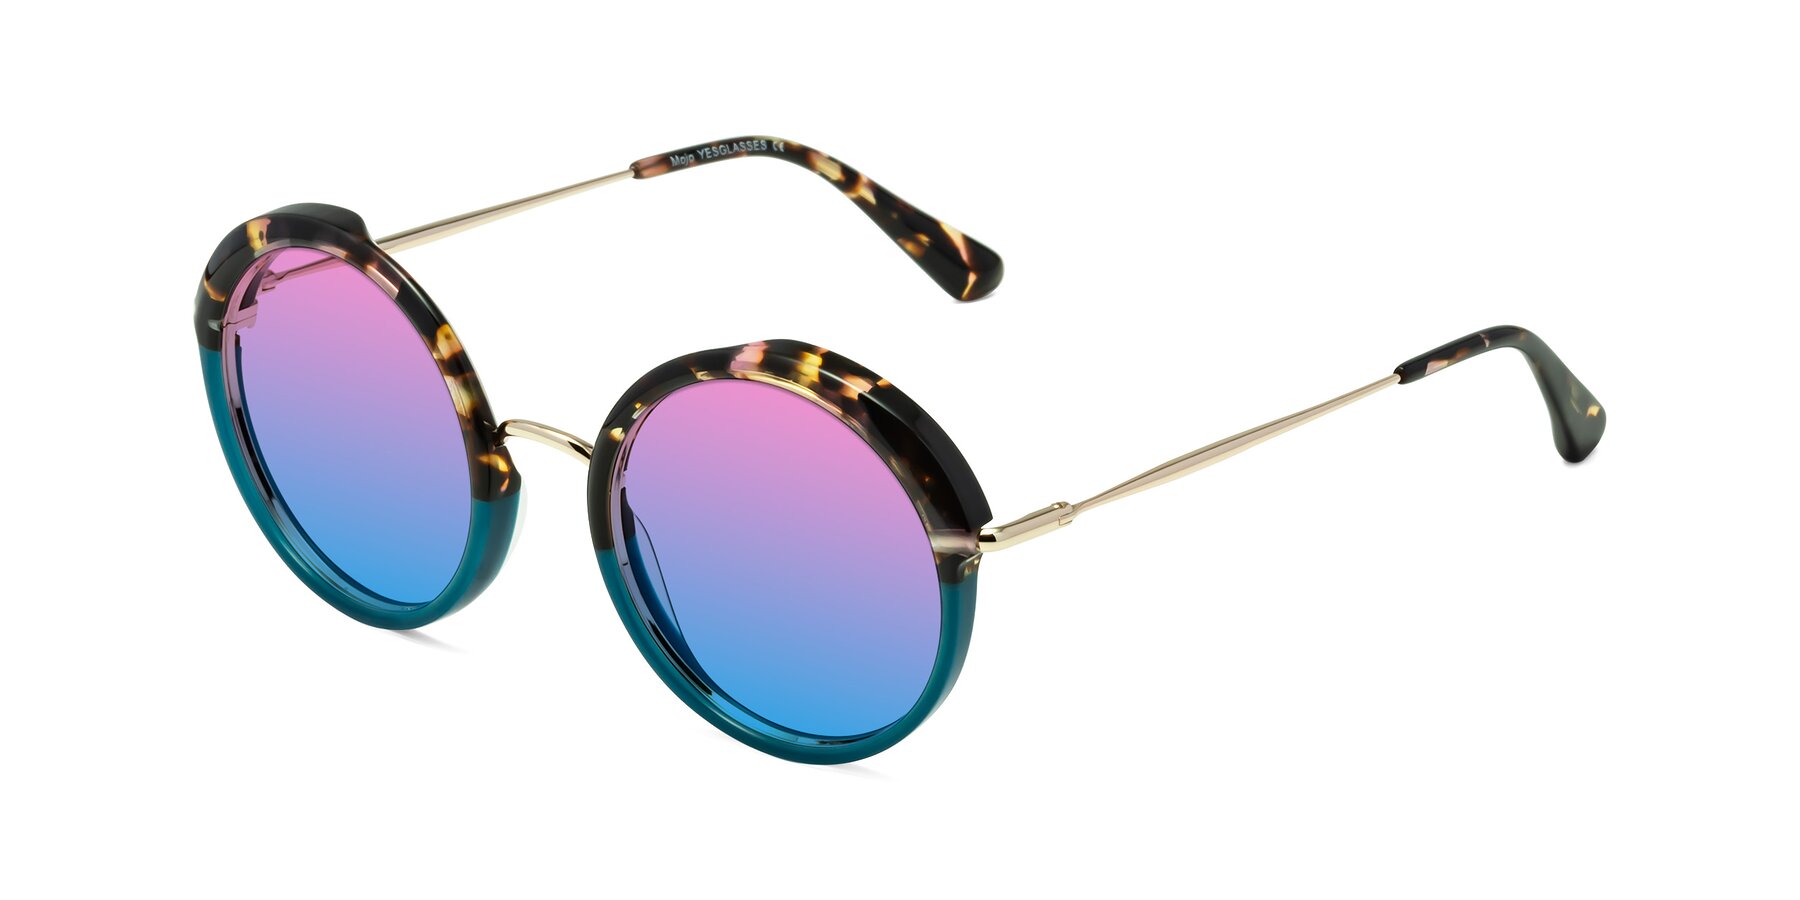 Angle of Mojo in Floral-Teal with Pink / Blue Gradient Lenses